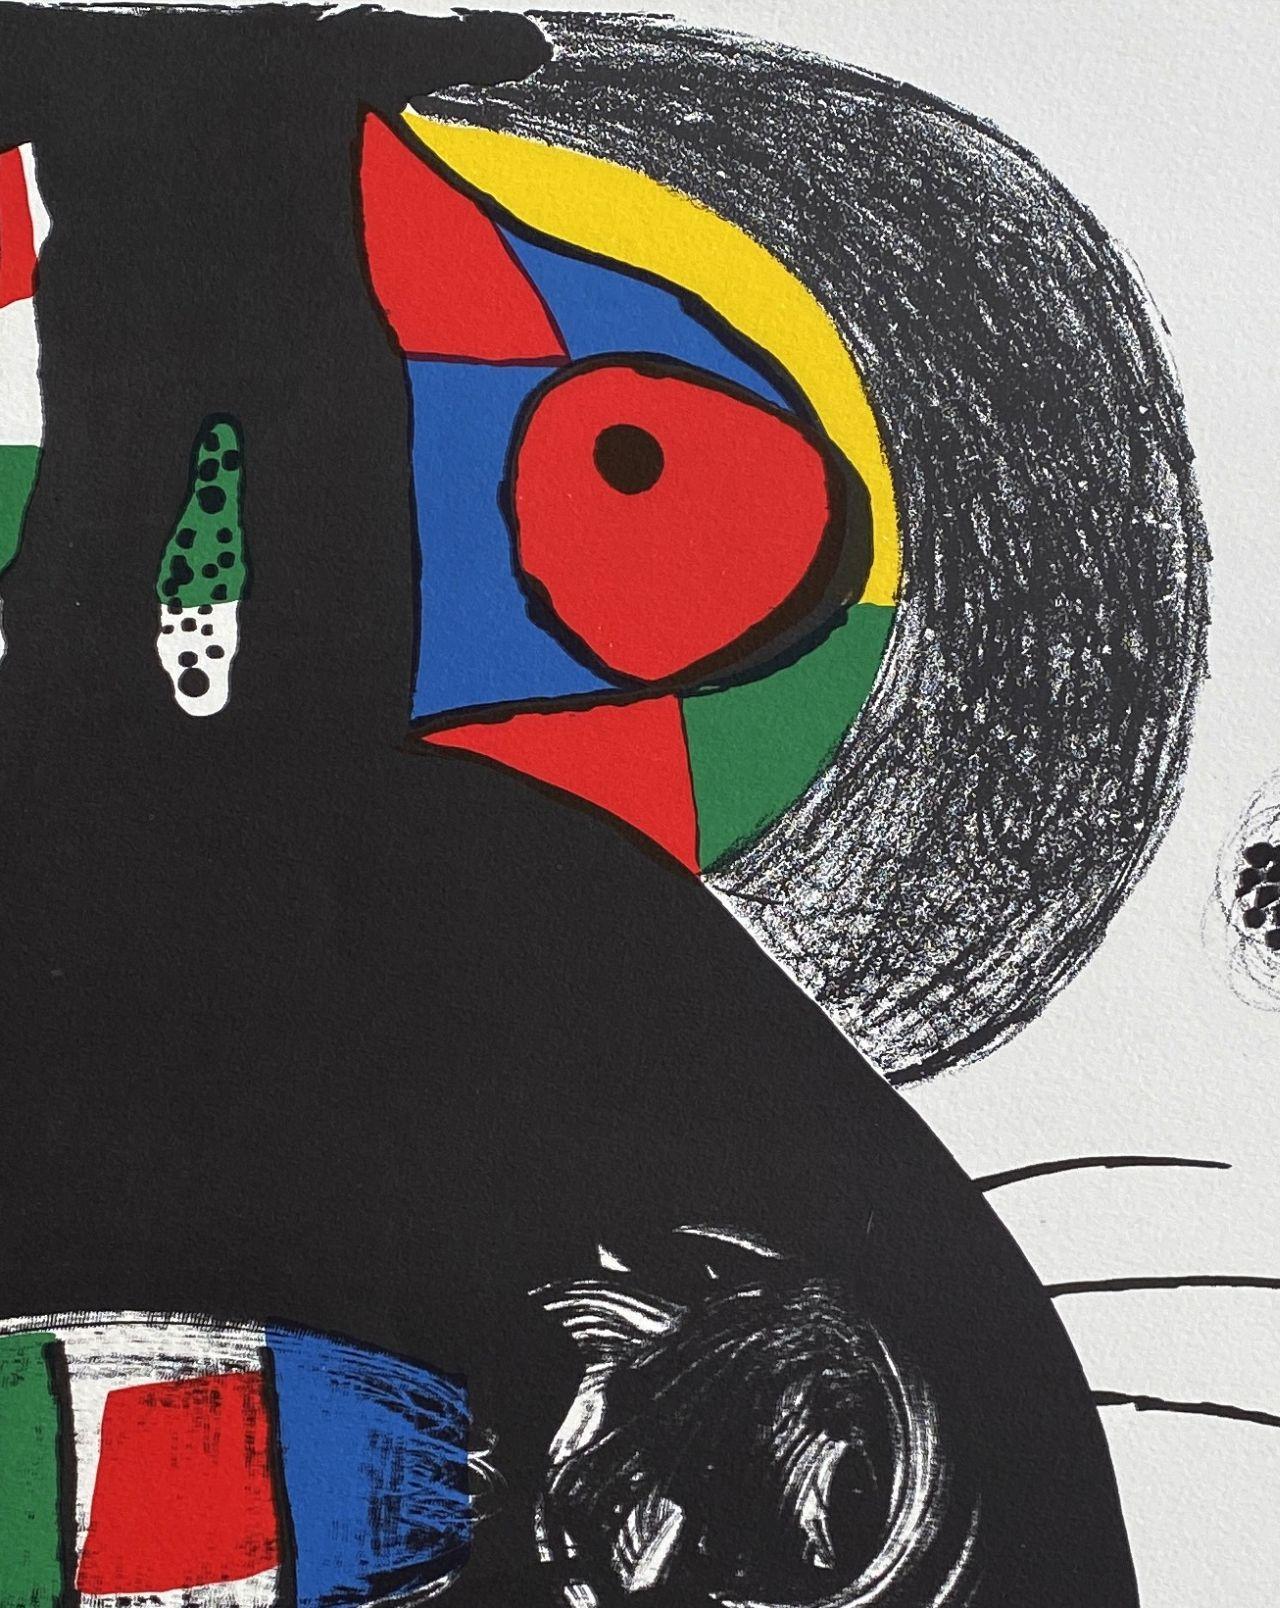 42 rue Blomet - Original Lithograph Handsigned Numbered - 100 copies - Abstract Print by Joan Miró